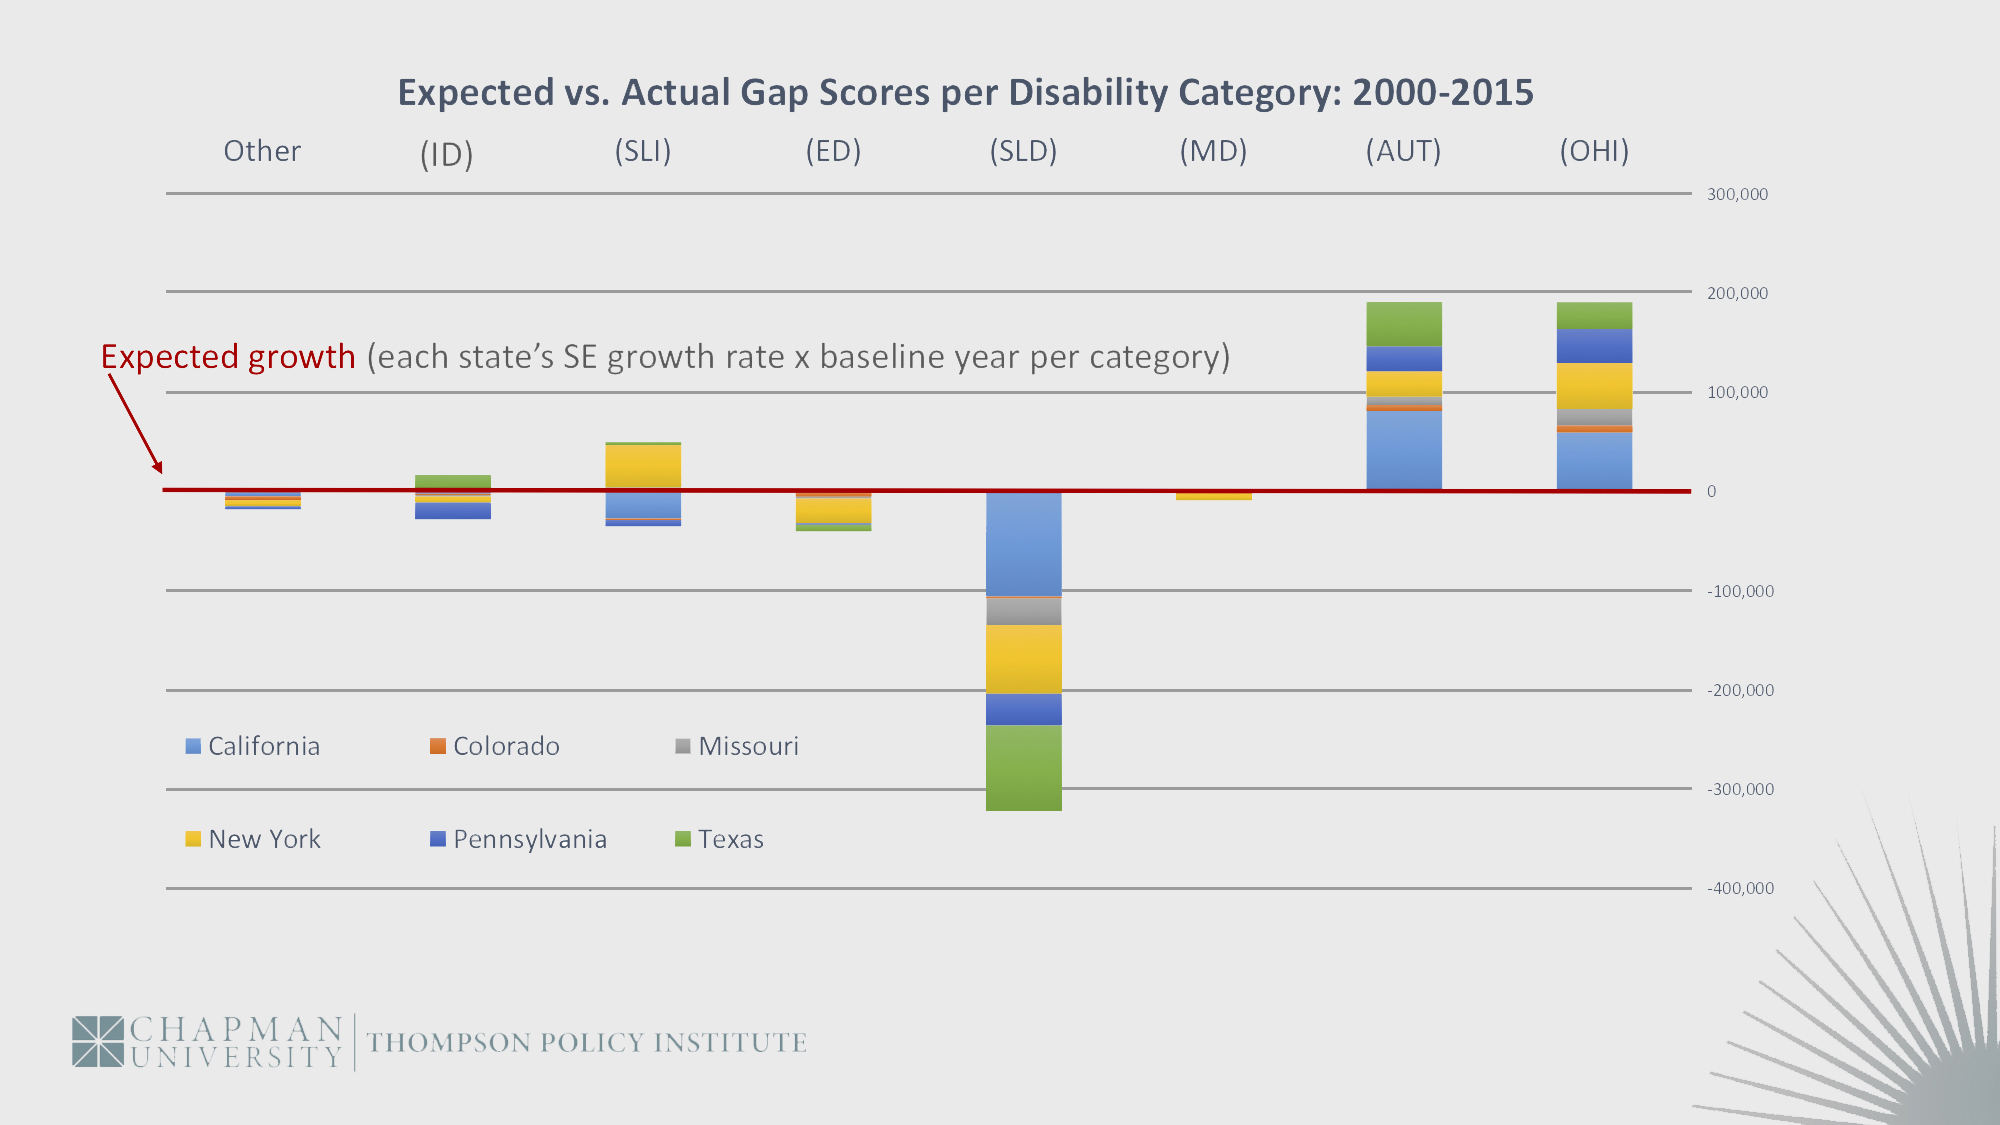 Expected vs. Actual Gap Scores per Disability Category: 2000-2015